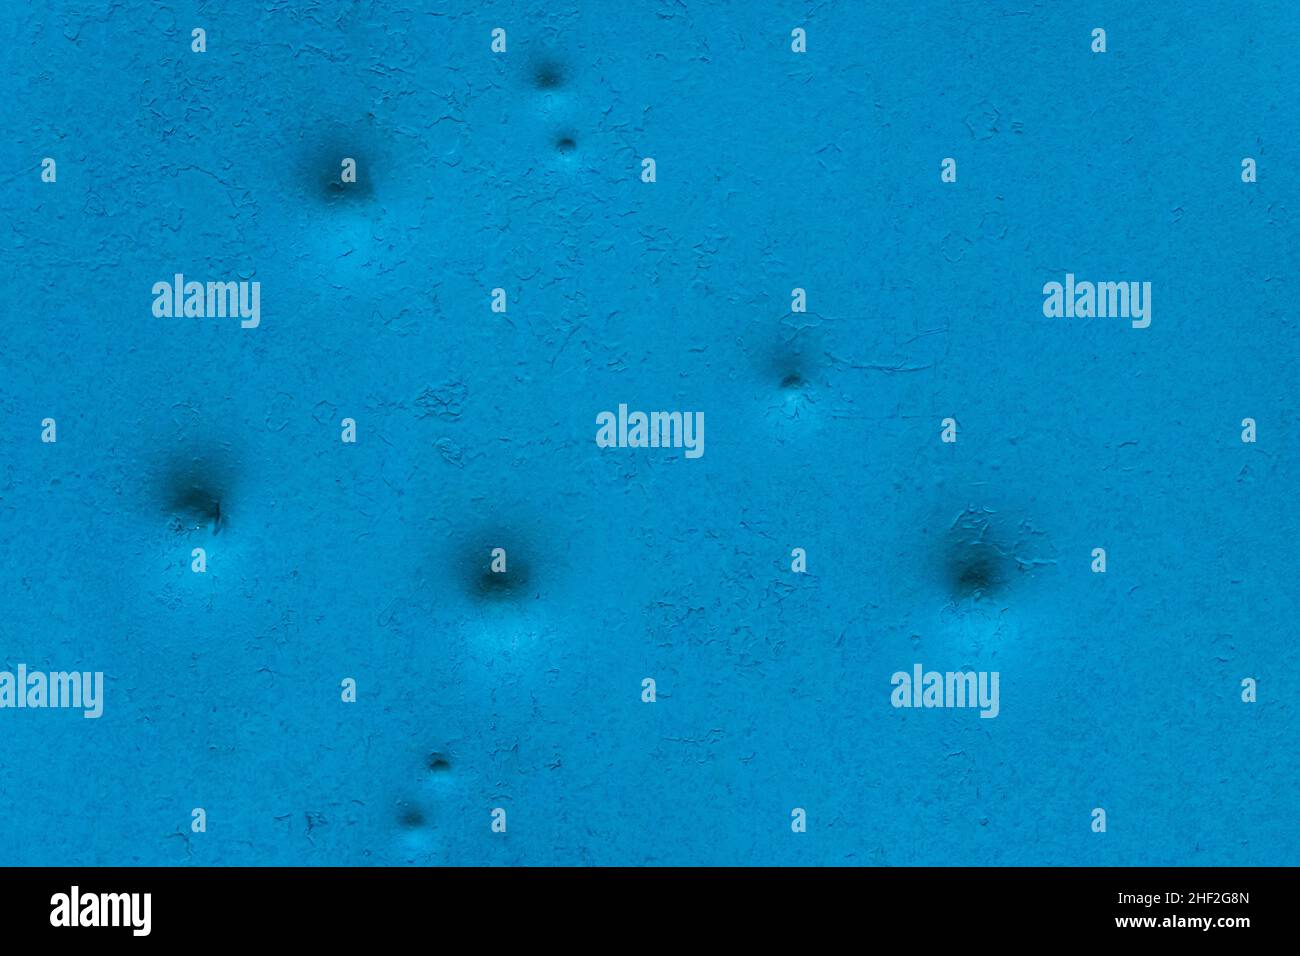 Dents pattern, holes or bullet shot marks on the blue metal surface of the old background iron texture. Stock Photo